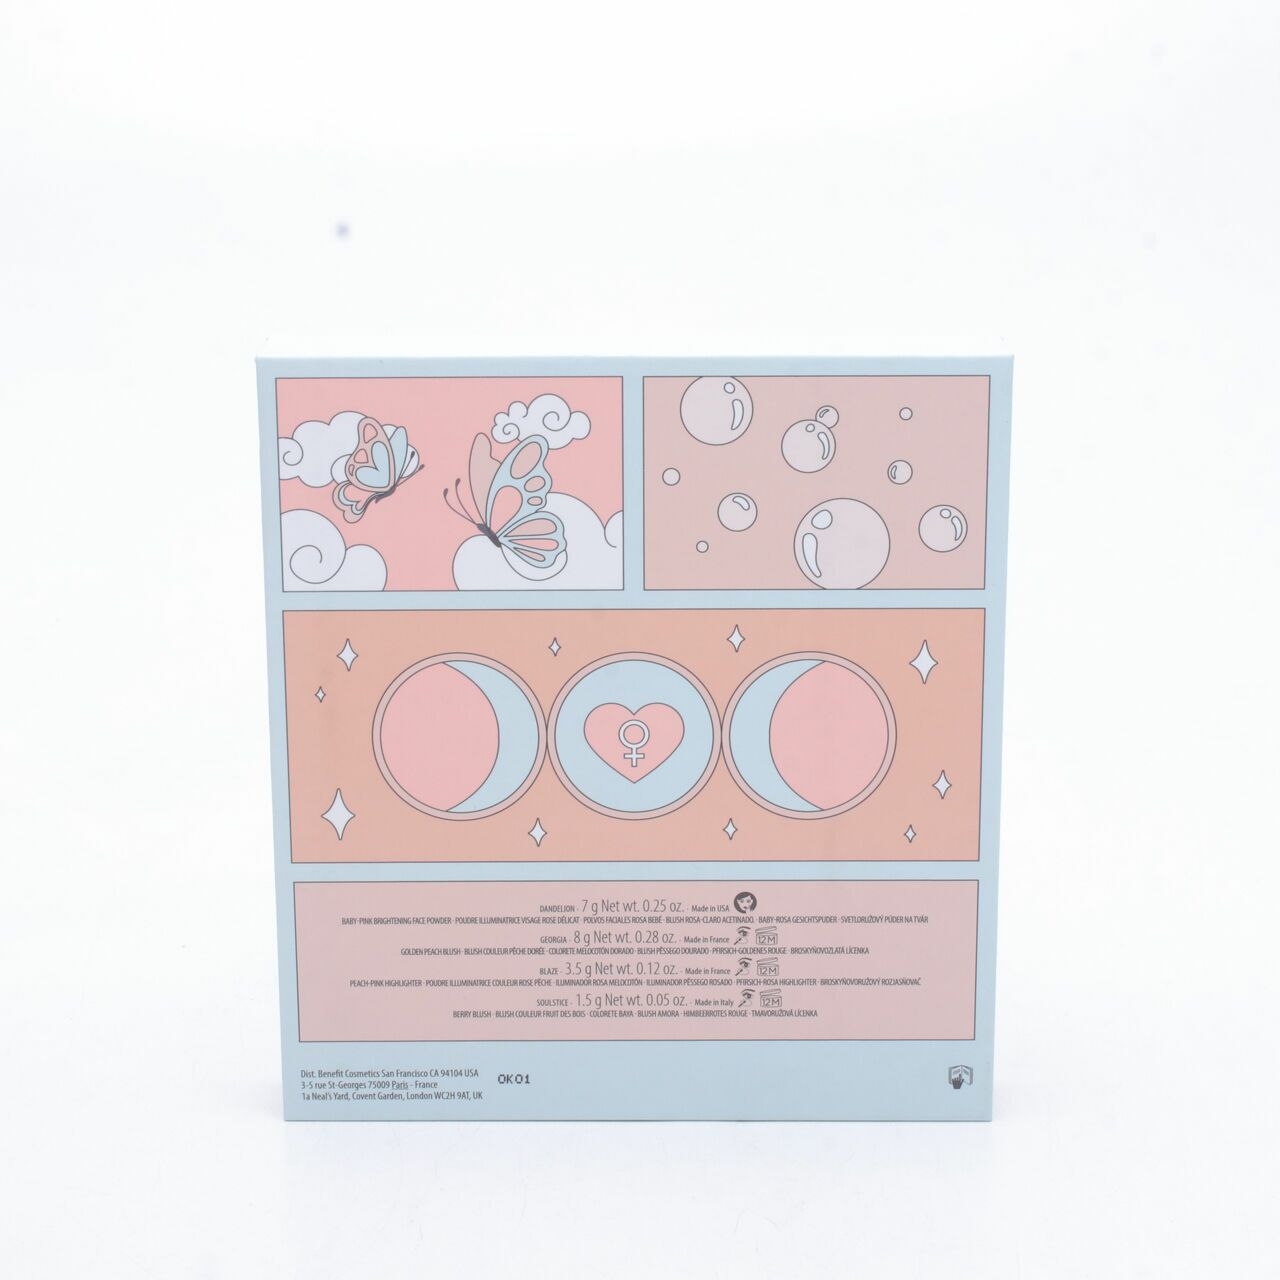 Benefit Air Goddess Fouroscope Sets and Palette